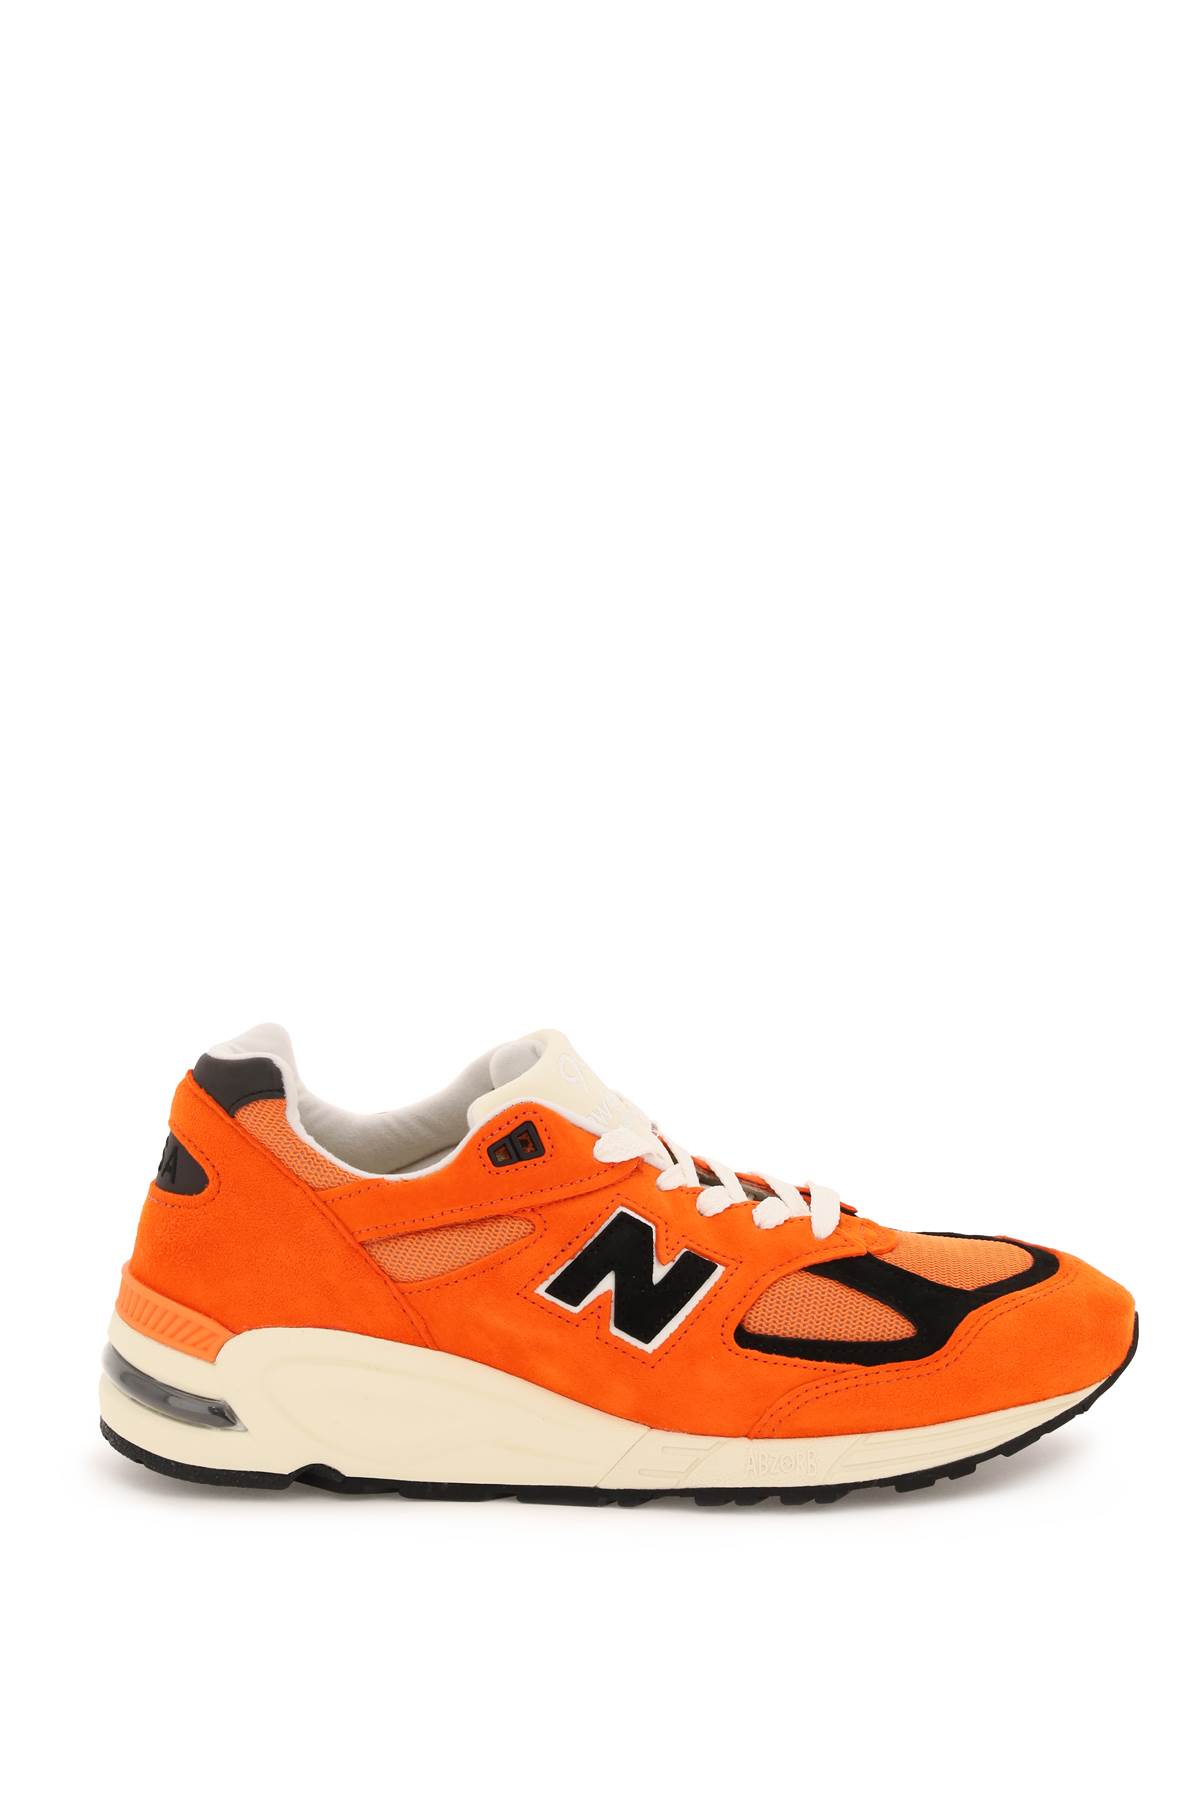 New Balance Made In U.s.a 990v2 Sneakers - 40th Anniversary